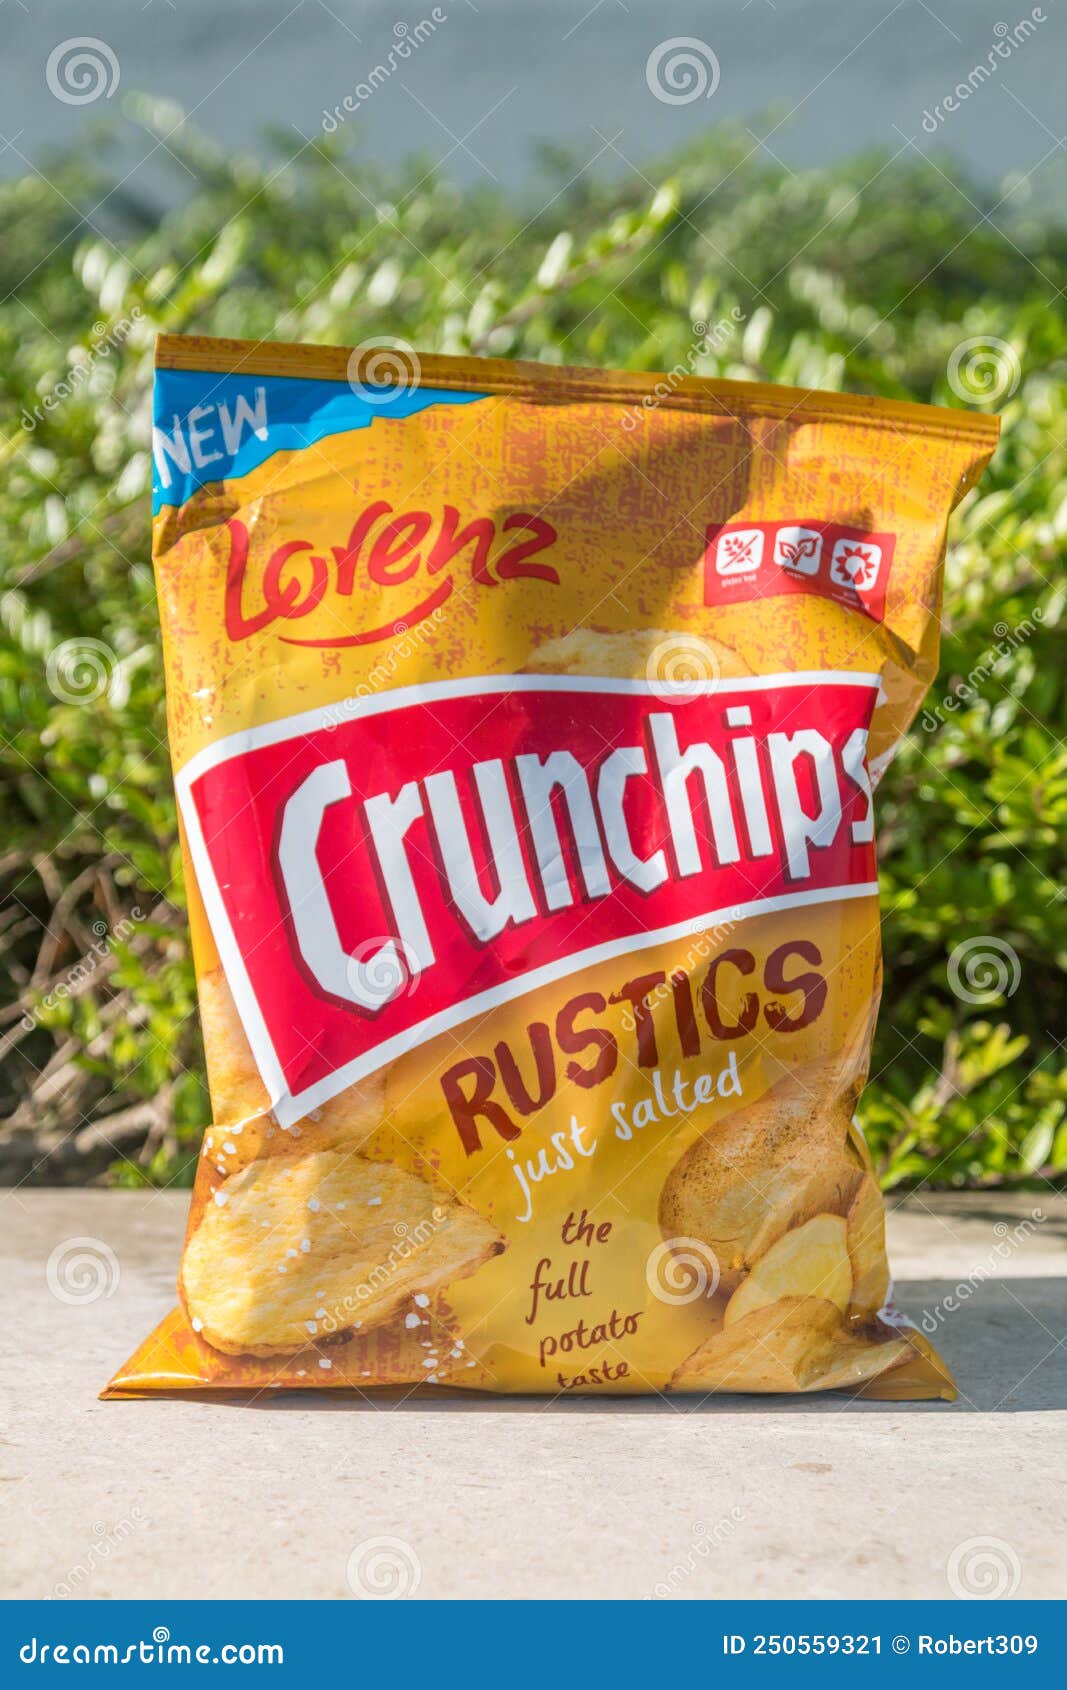 Photos Dreamstime & Lorenz from Stock Crunchips Stock Free Royalty-Free - Photos